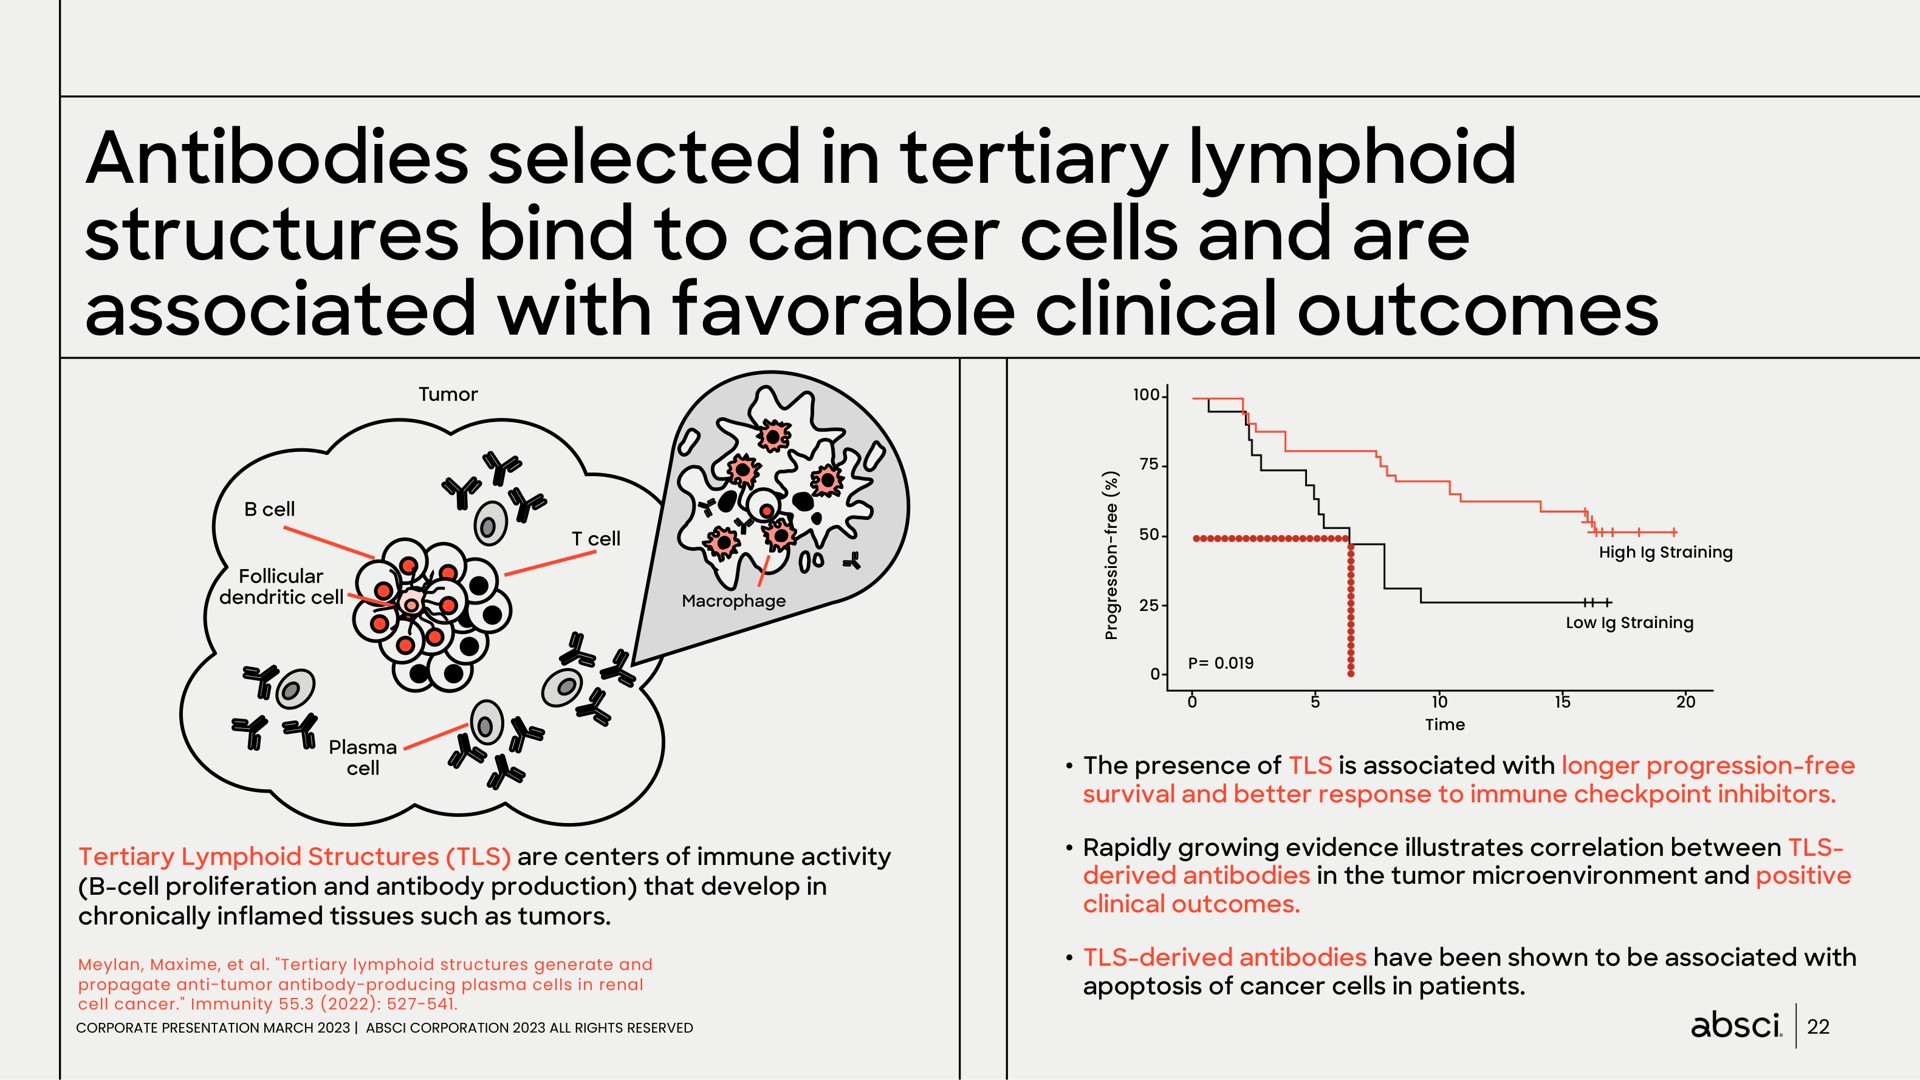 antibodies selected in tertiary lymphoid structures bind to cancer cells and are associated with favorable clinical outcomes go | Absci